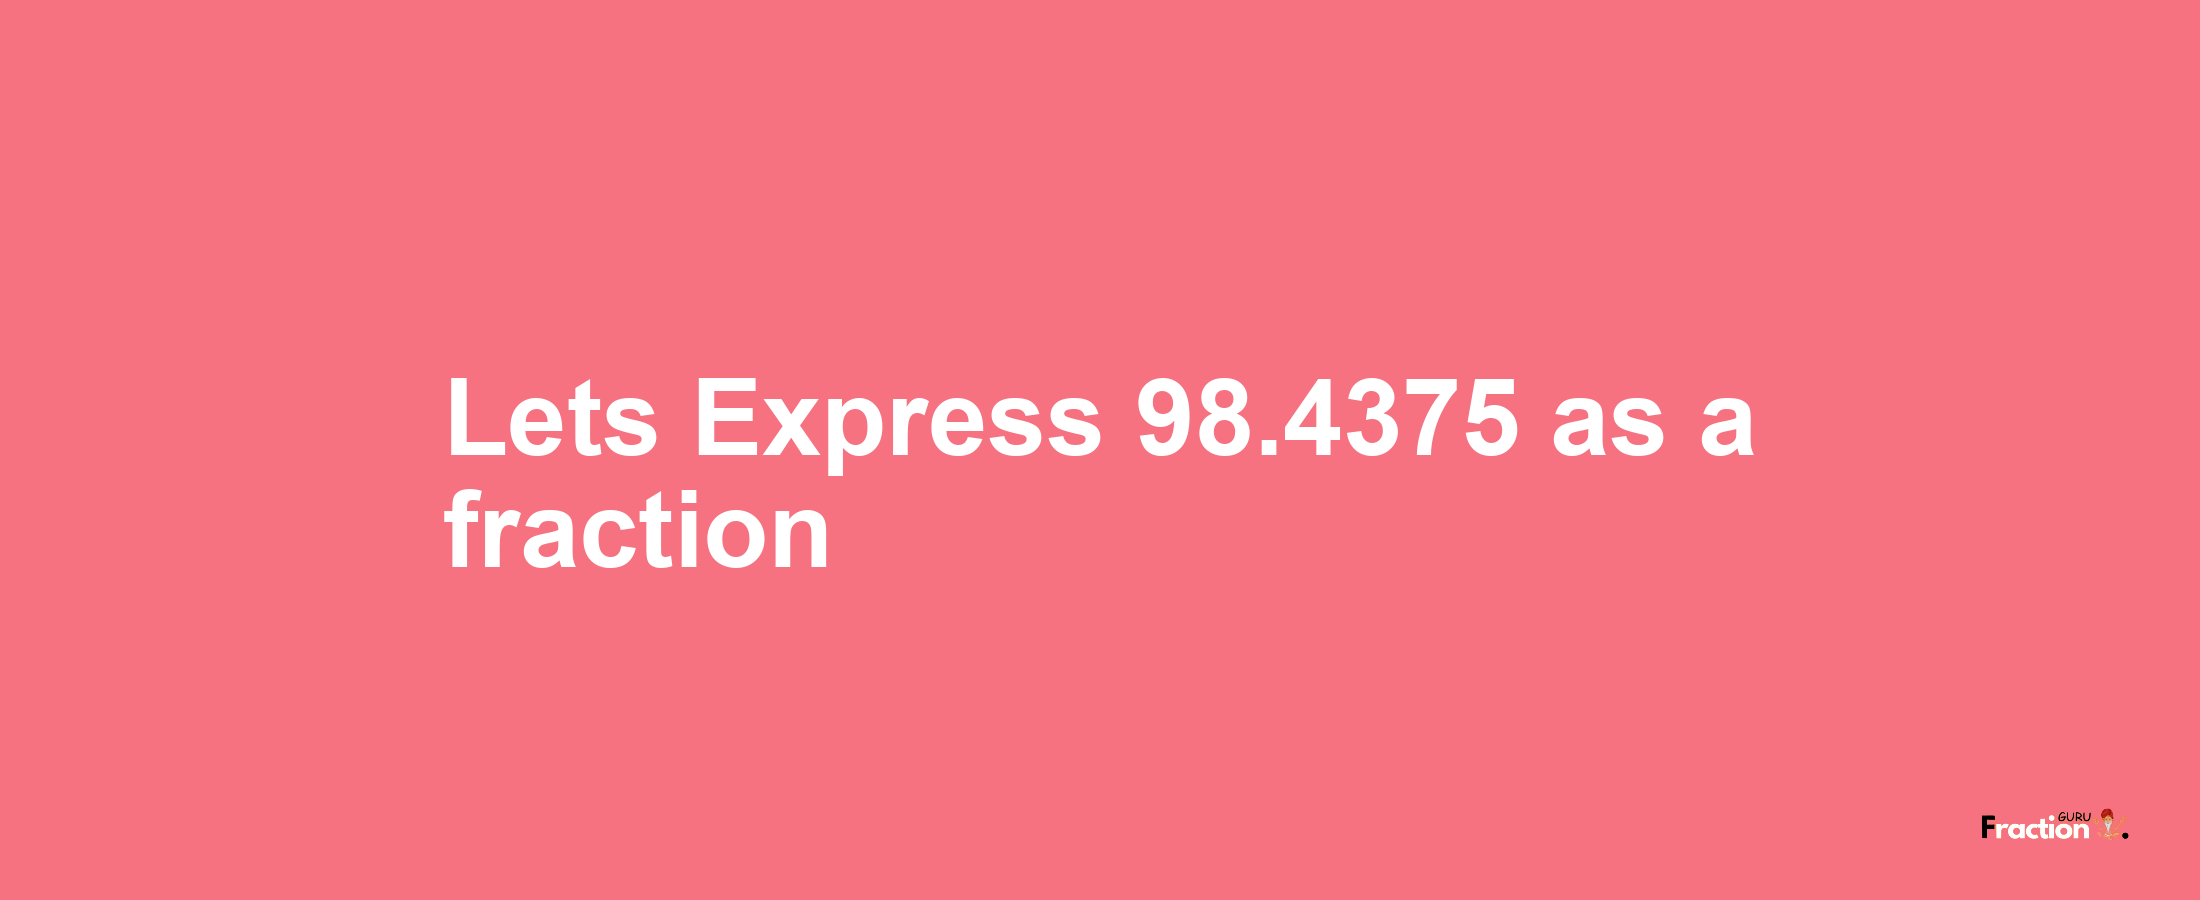 Lets Express 98.4375 as afraction